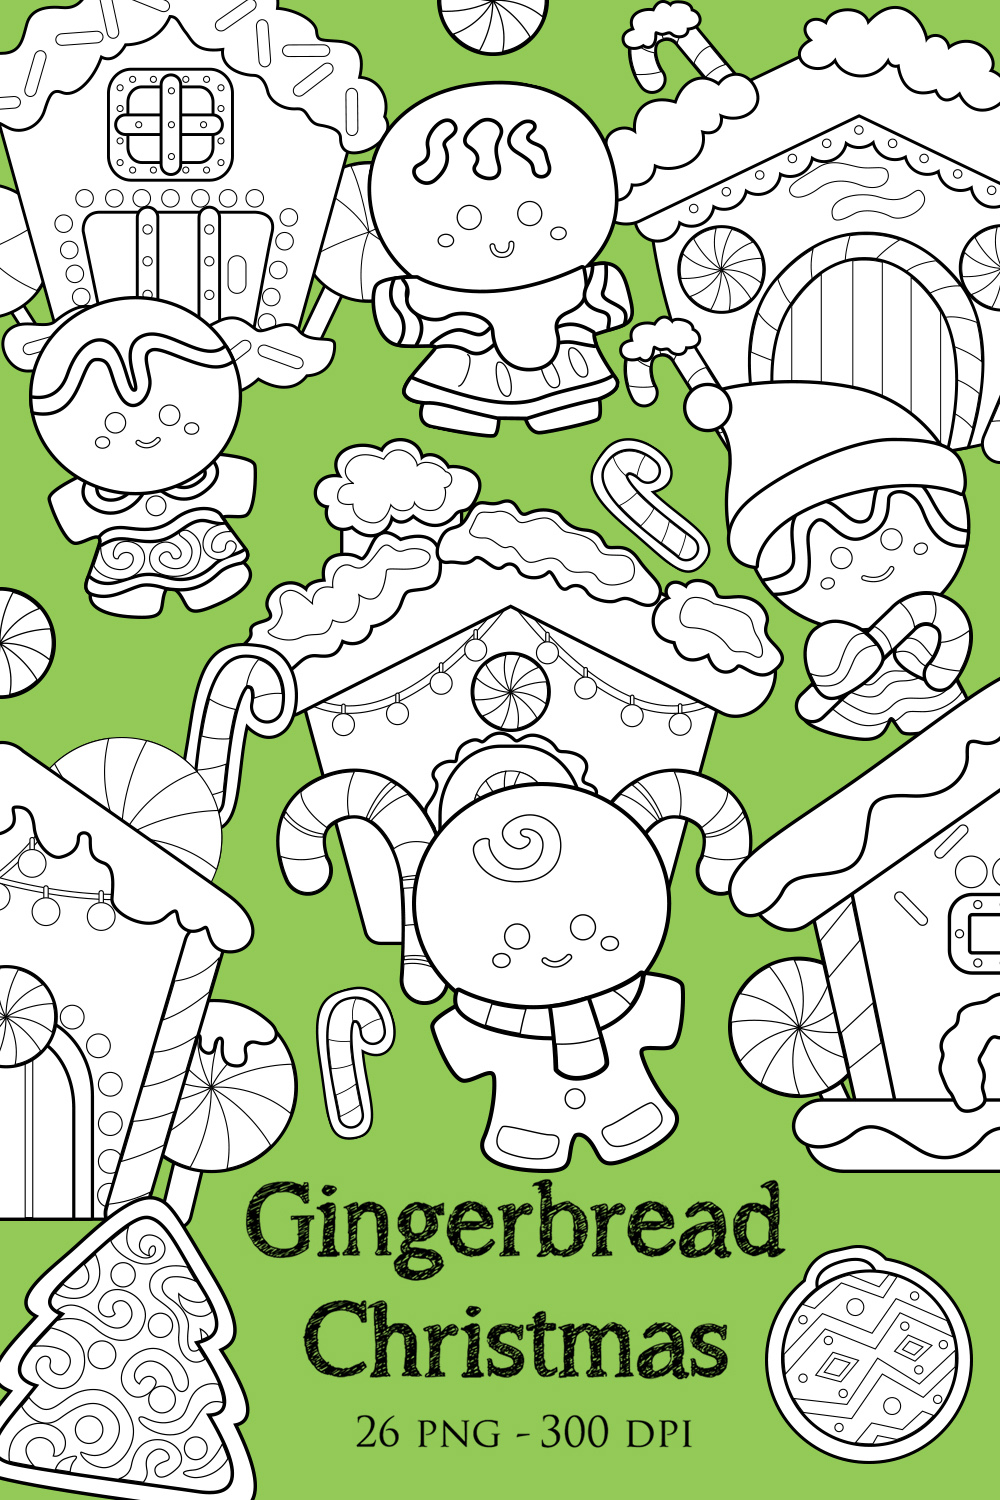 Cute Gingerbread Christmas Cookies House Cartoon and Decoration Object DIgital Stamp Outline Black and White pinterest preview image.